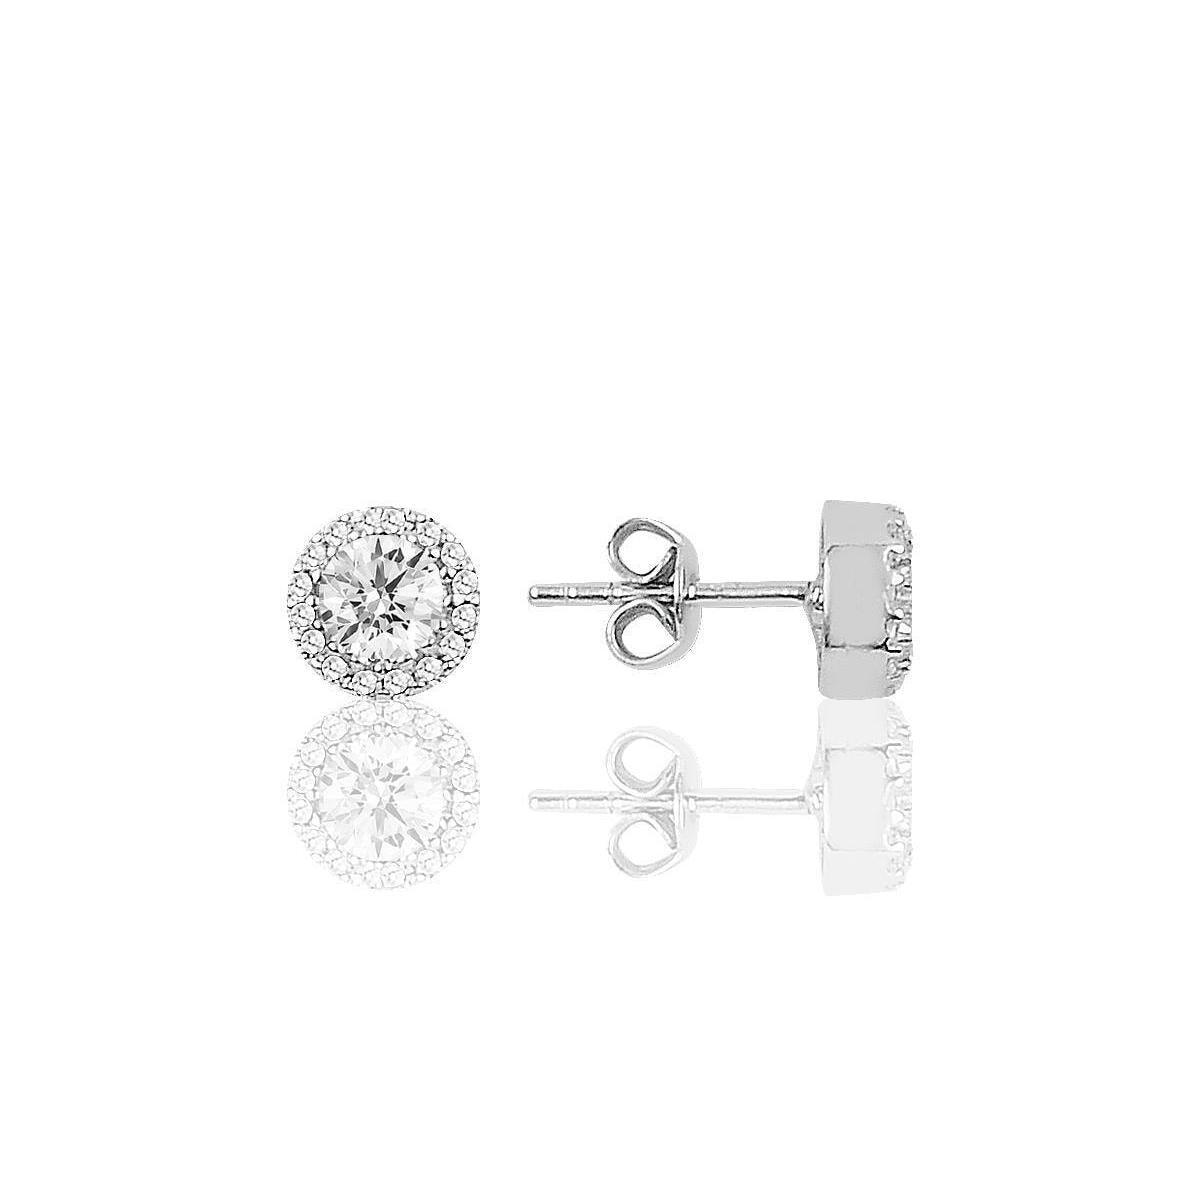 Solitaire Earrings Singapore • Solitaire Pierced Earrings Swarovski - Trending Silver Gifts